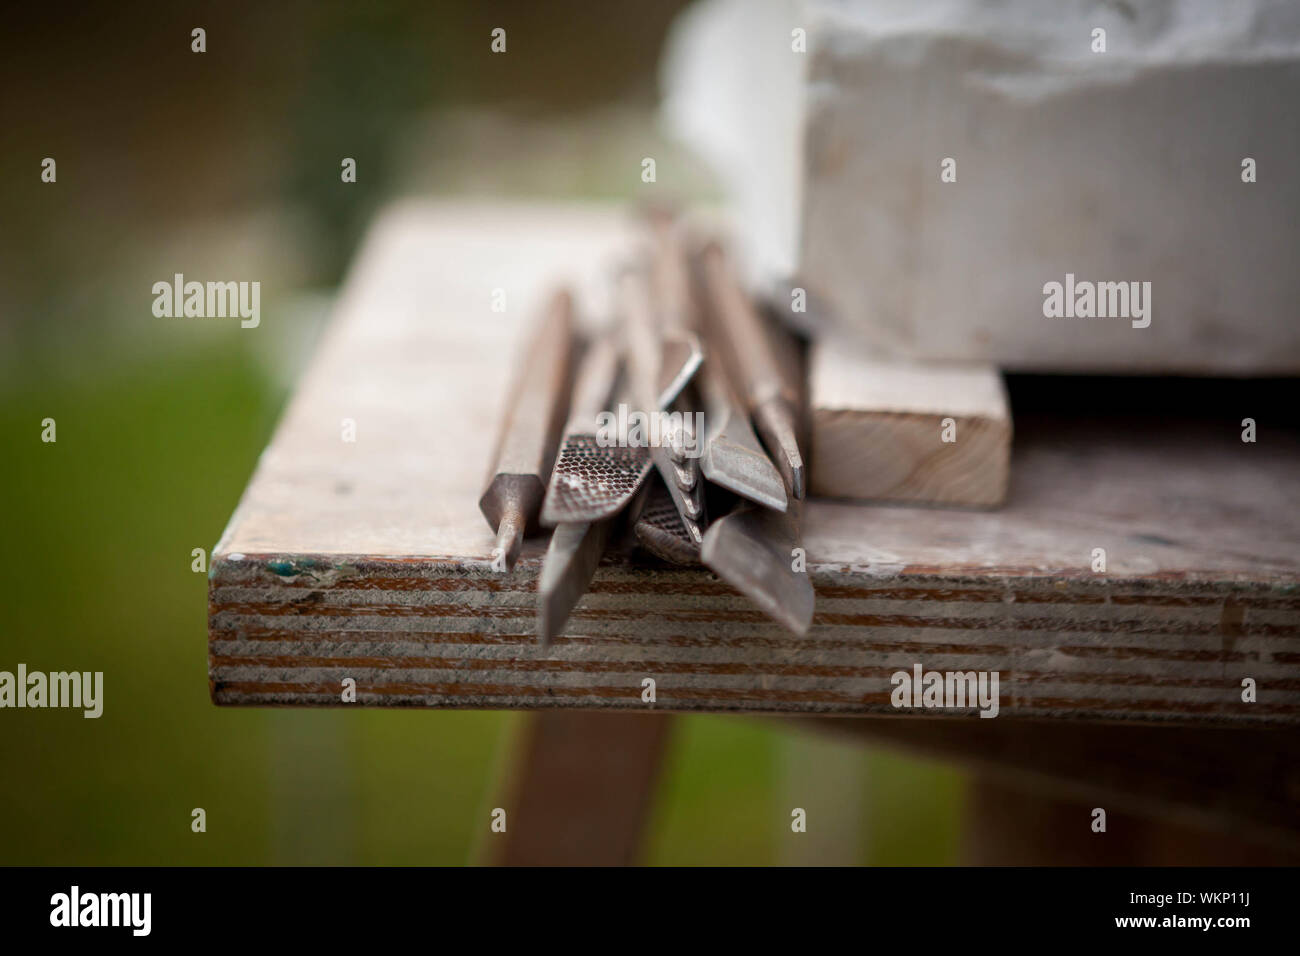 Sculpting Tools On Wooden Table In Yard Stock Photo